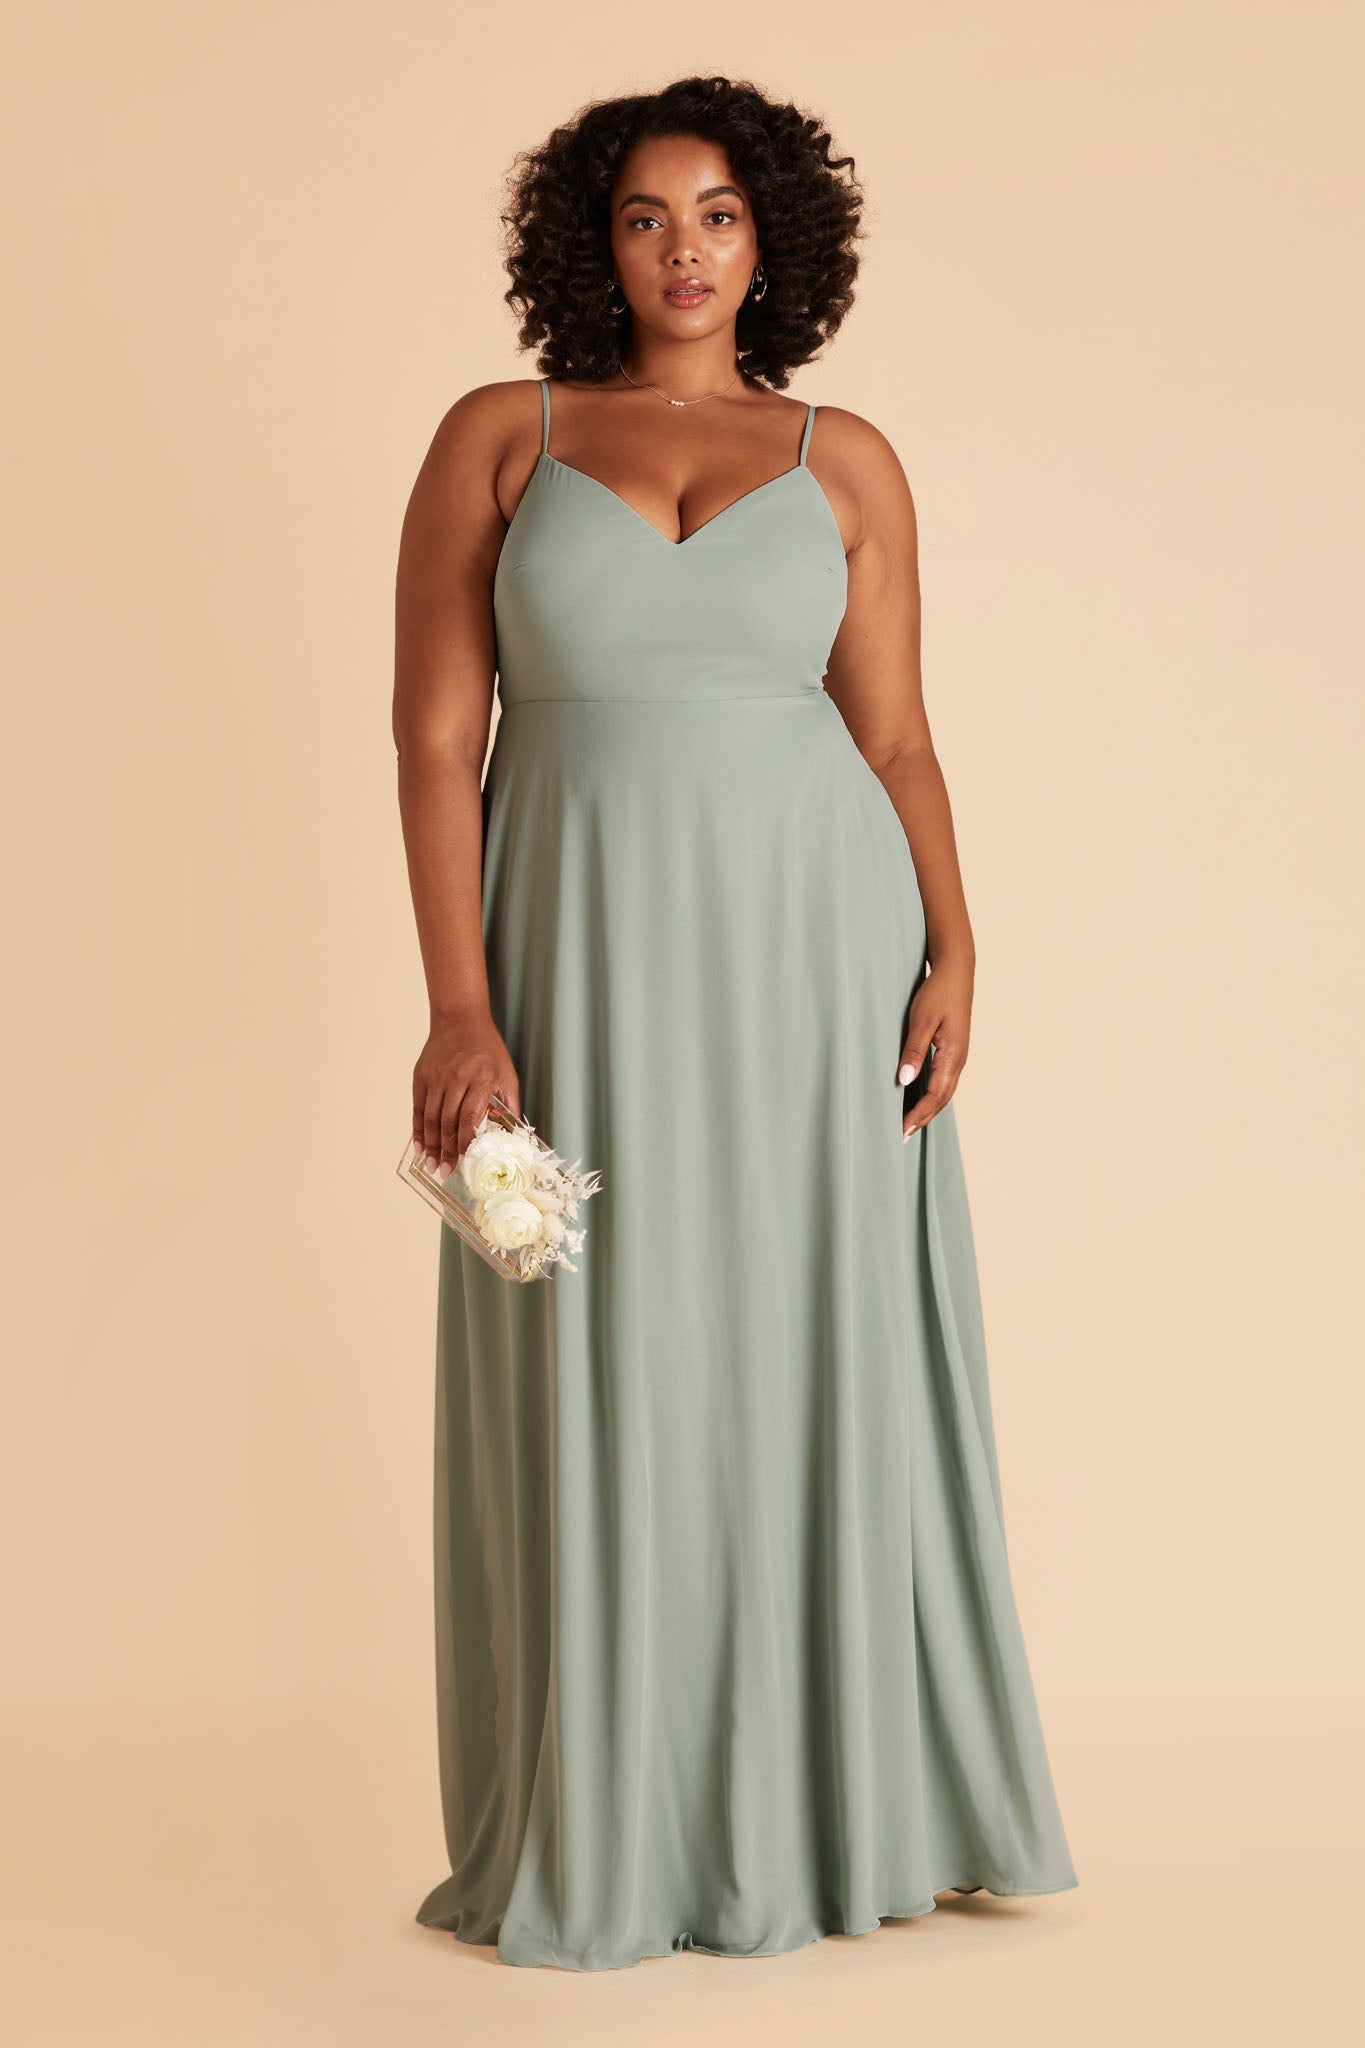 Front view of the floor-length Devin Convertible Plus Size Bridesmaid Dress in sage chiffon with a V-neck front and simple spaghetti straps. The flowing skirt has no slit, as this is an optional feature.